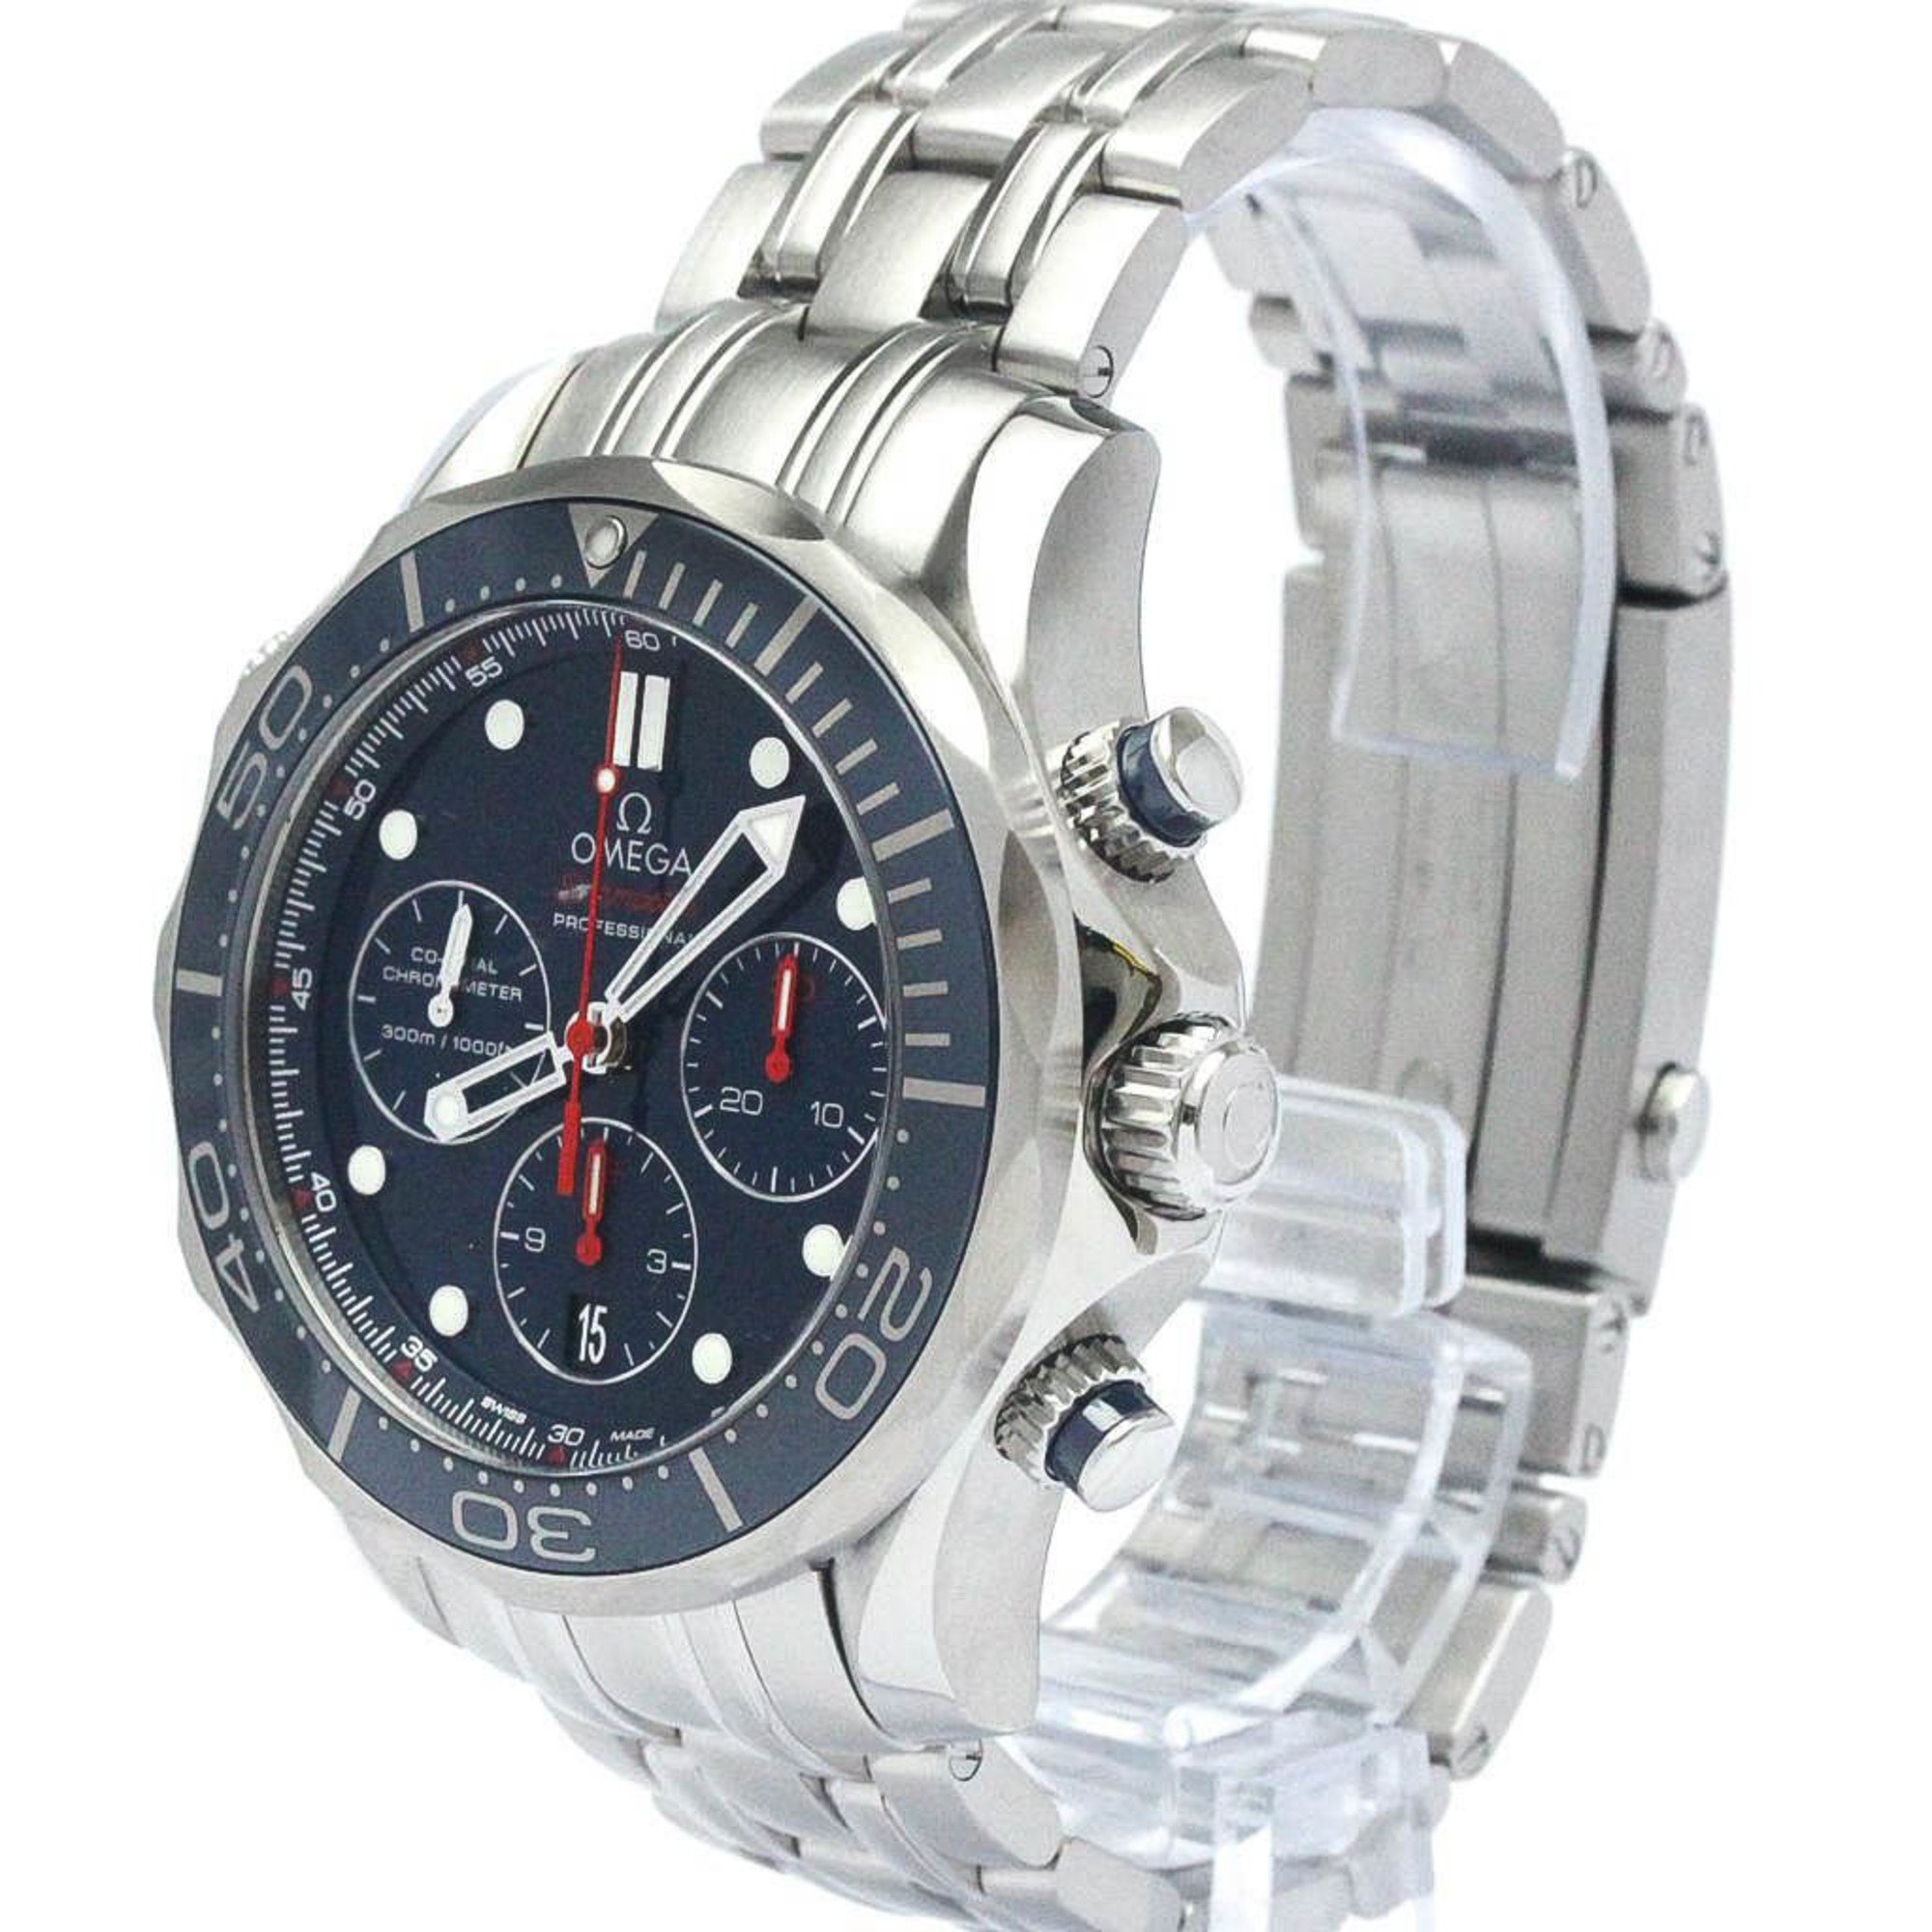 Polished OMEGA Seamaster Diver Chronograph Watch 212.30.42.50.03.001 BF564391